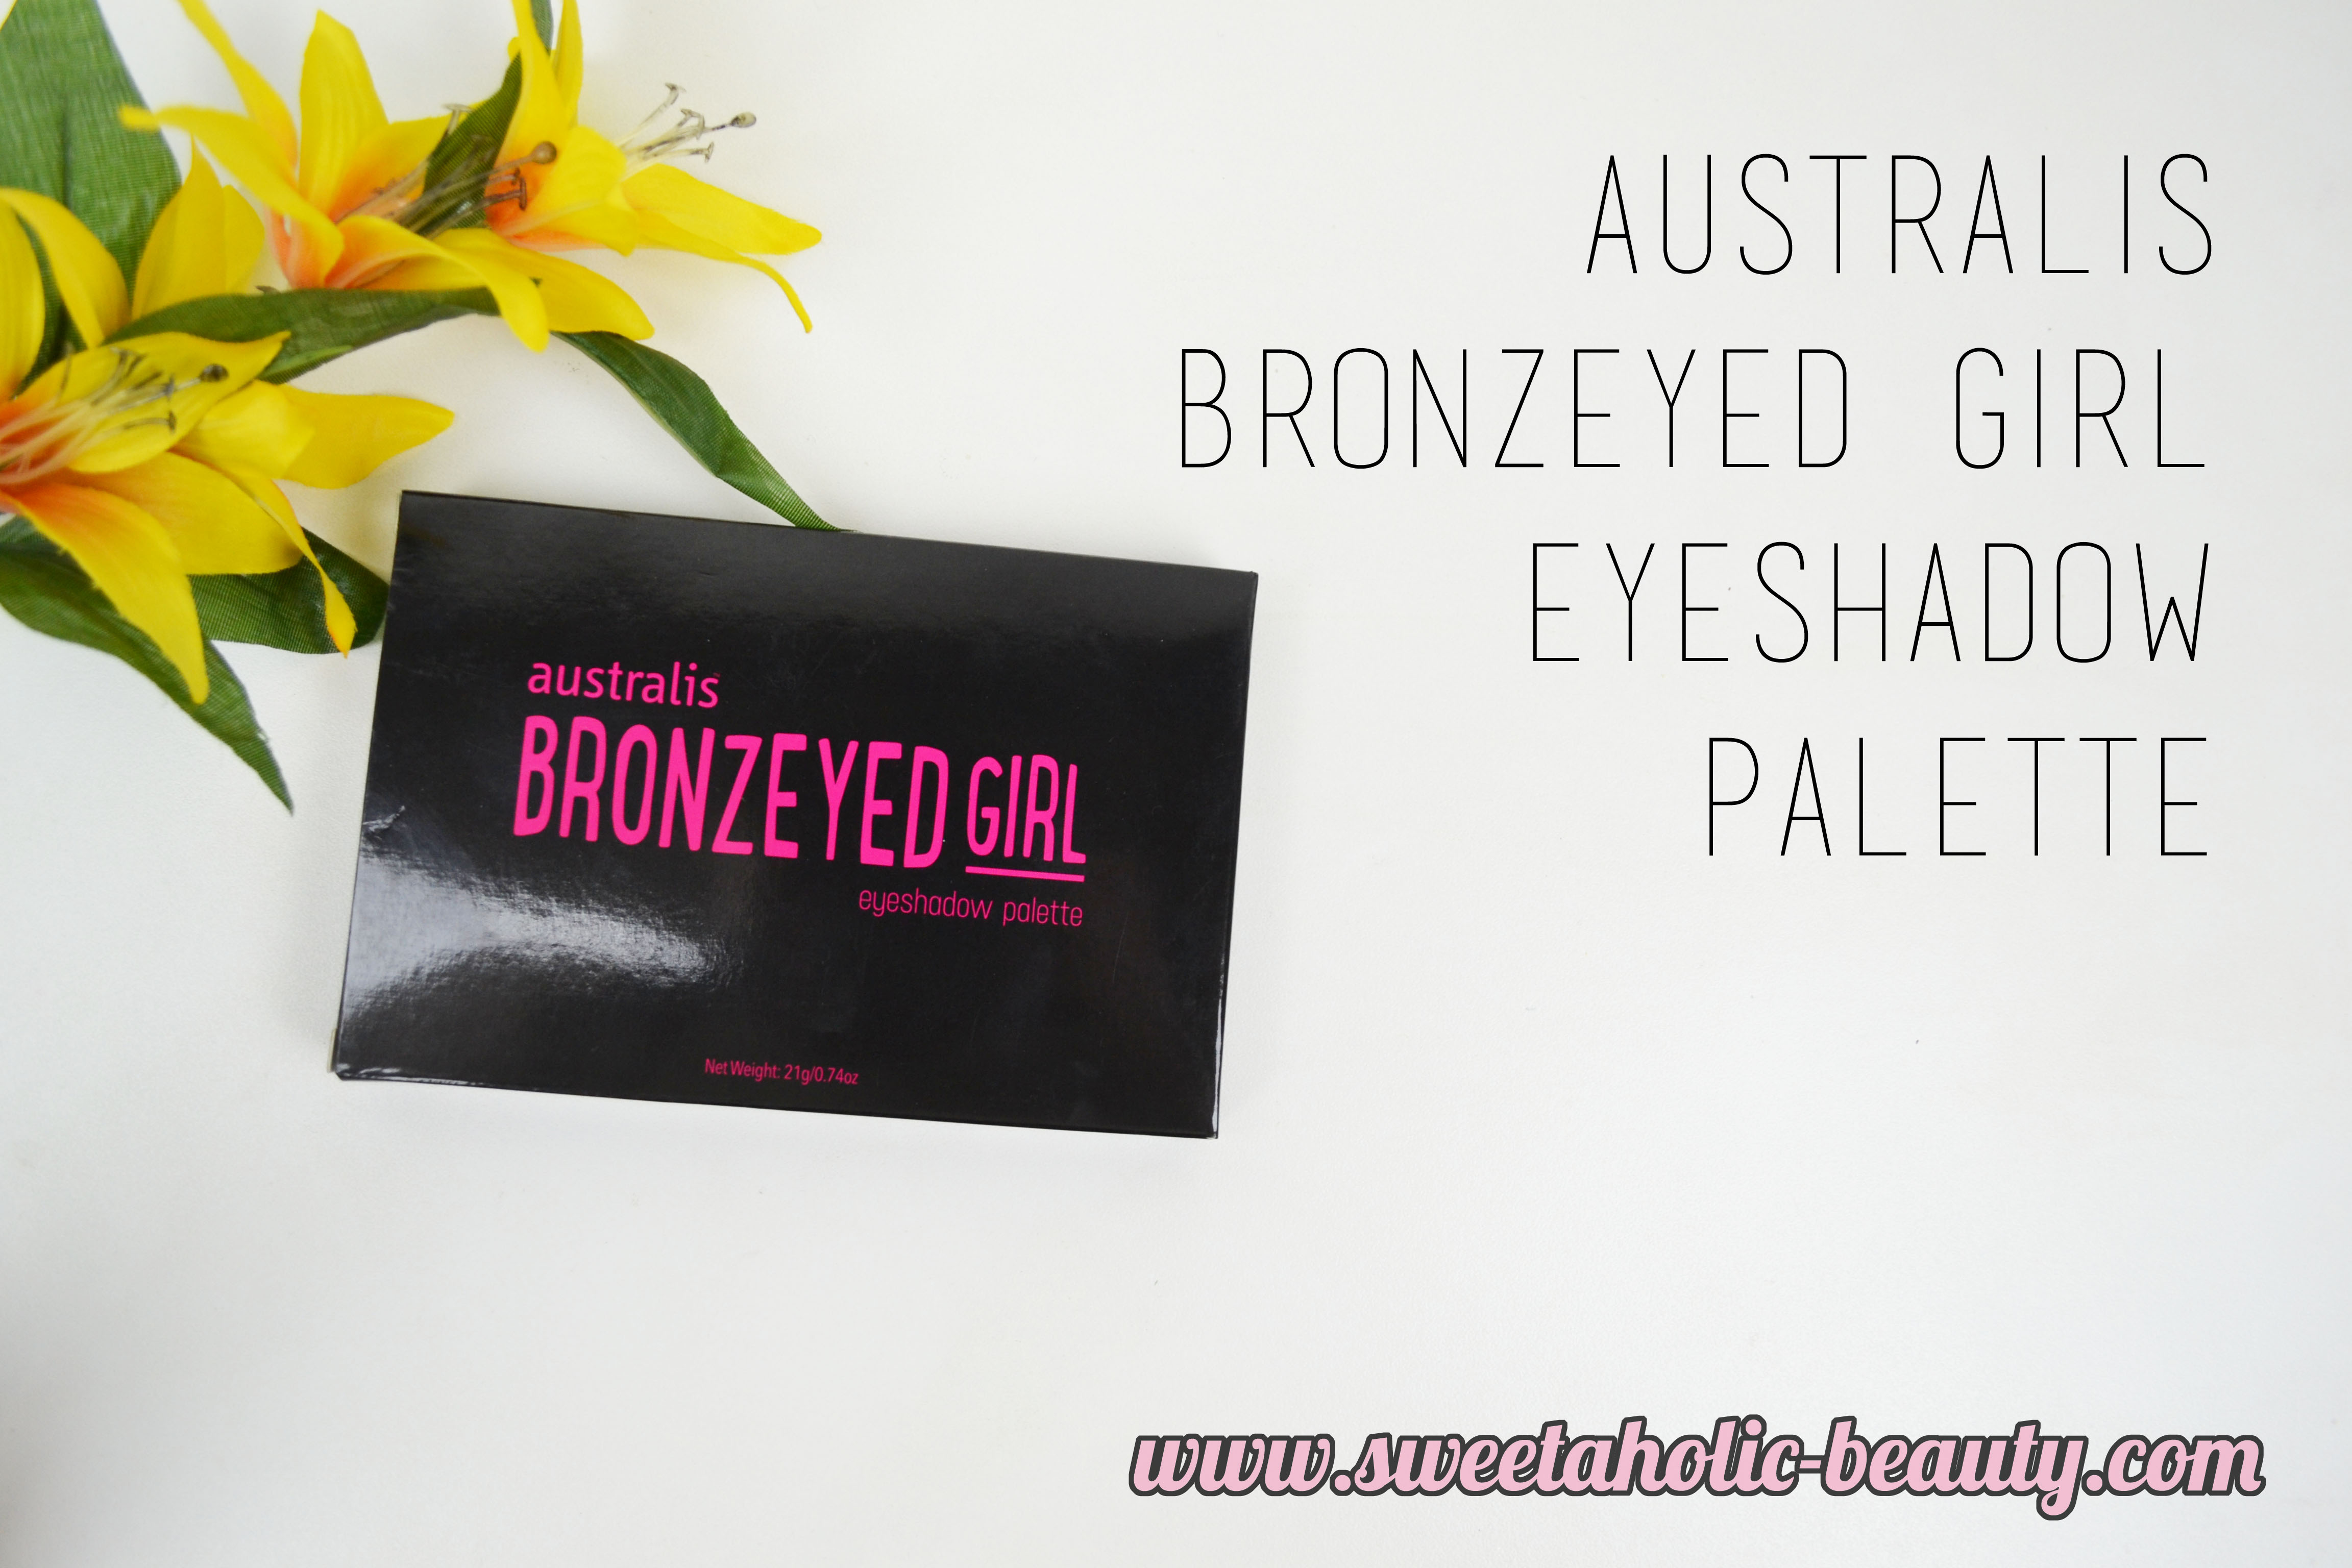 Australis Bronzeyed Girl Eyeshadow Palette Review & Swatches - Sweetaholic Beauty